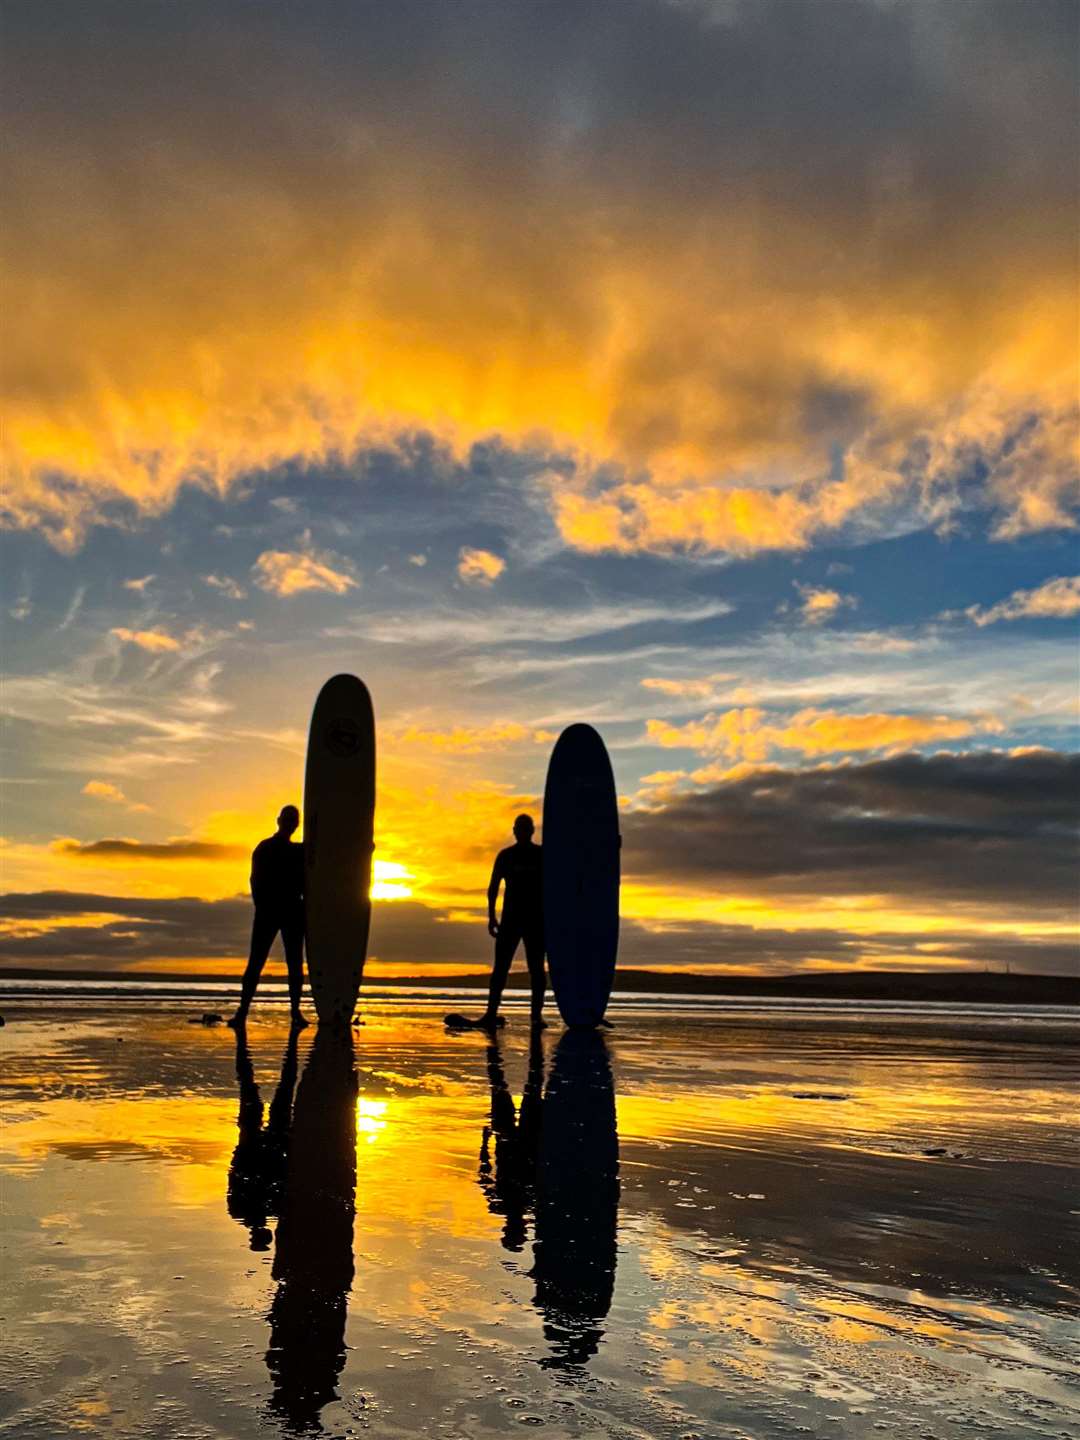 Paul Steven sent this dramatic image of surfers at Dunnet beach.